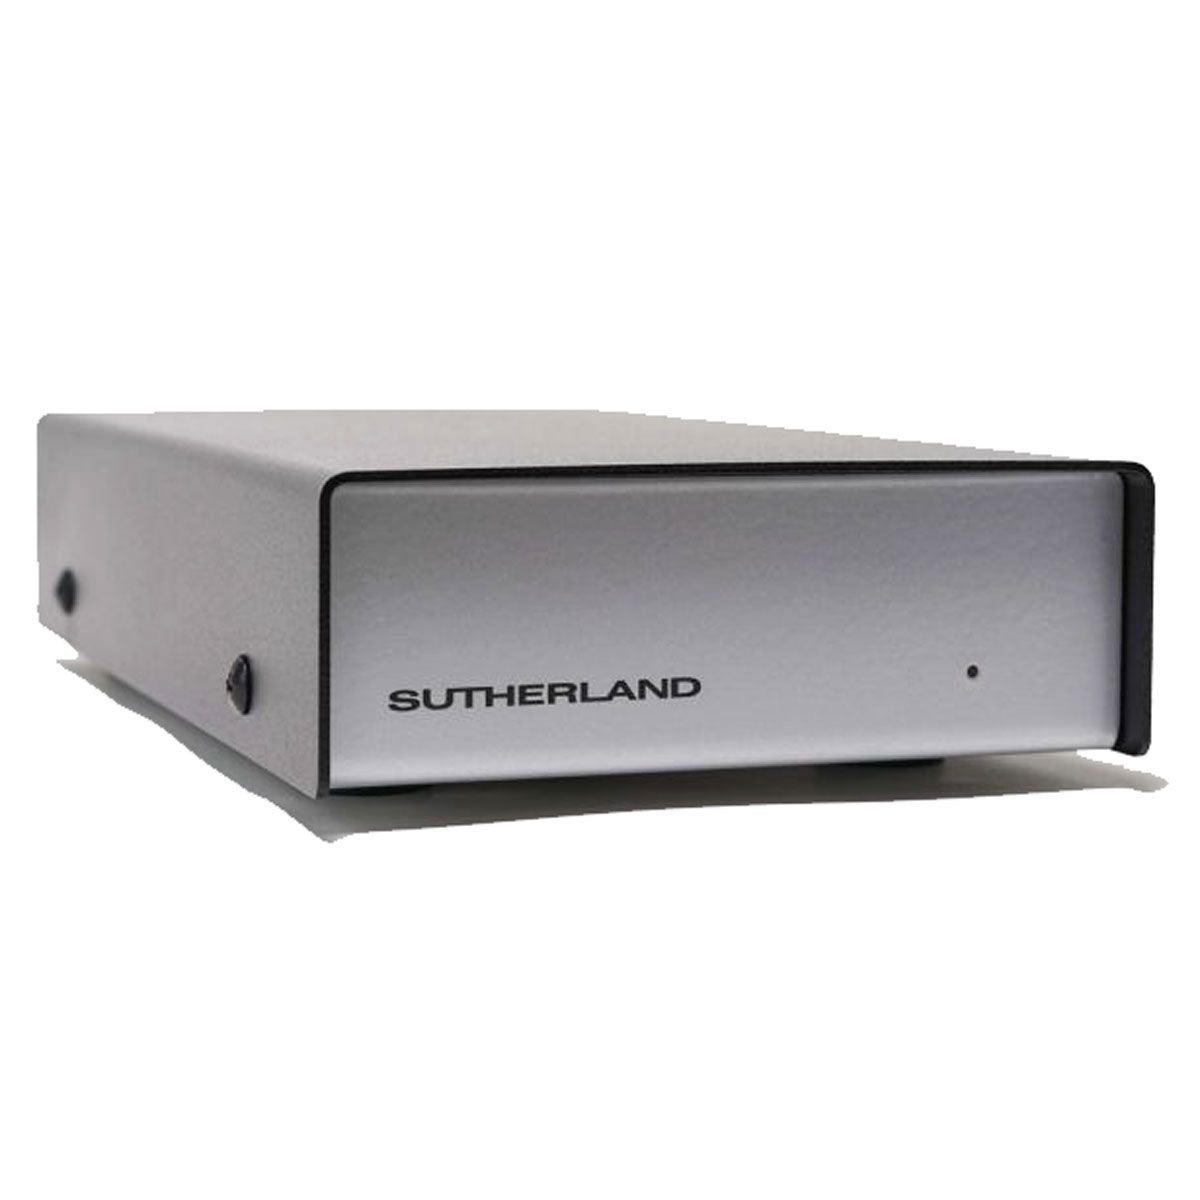 Sutherland TZ Vibe Phono Preamp, front angle view